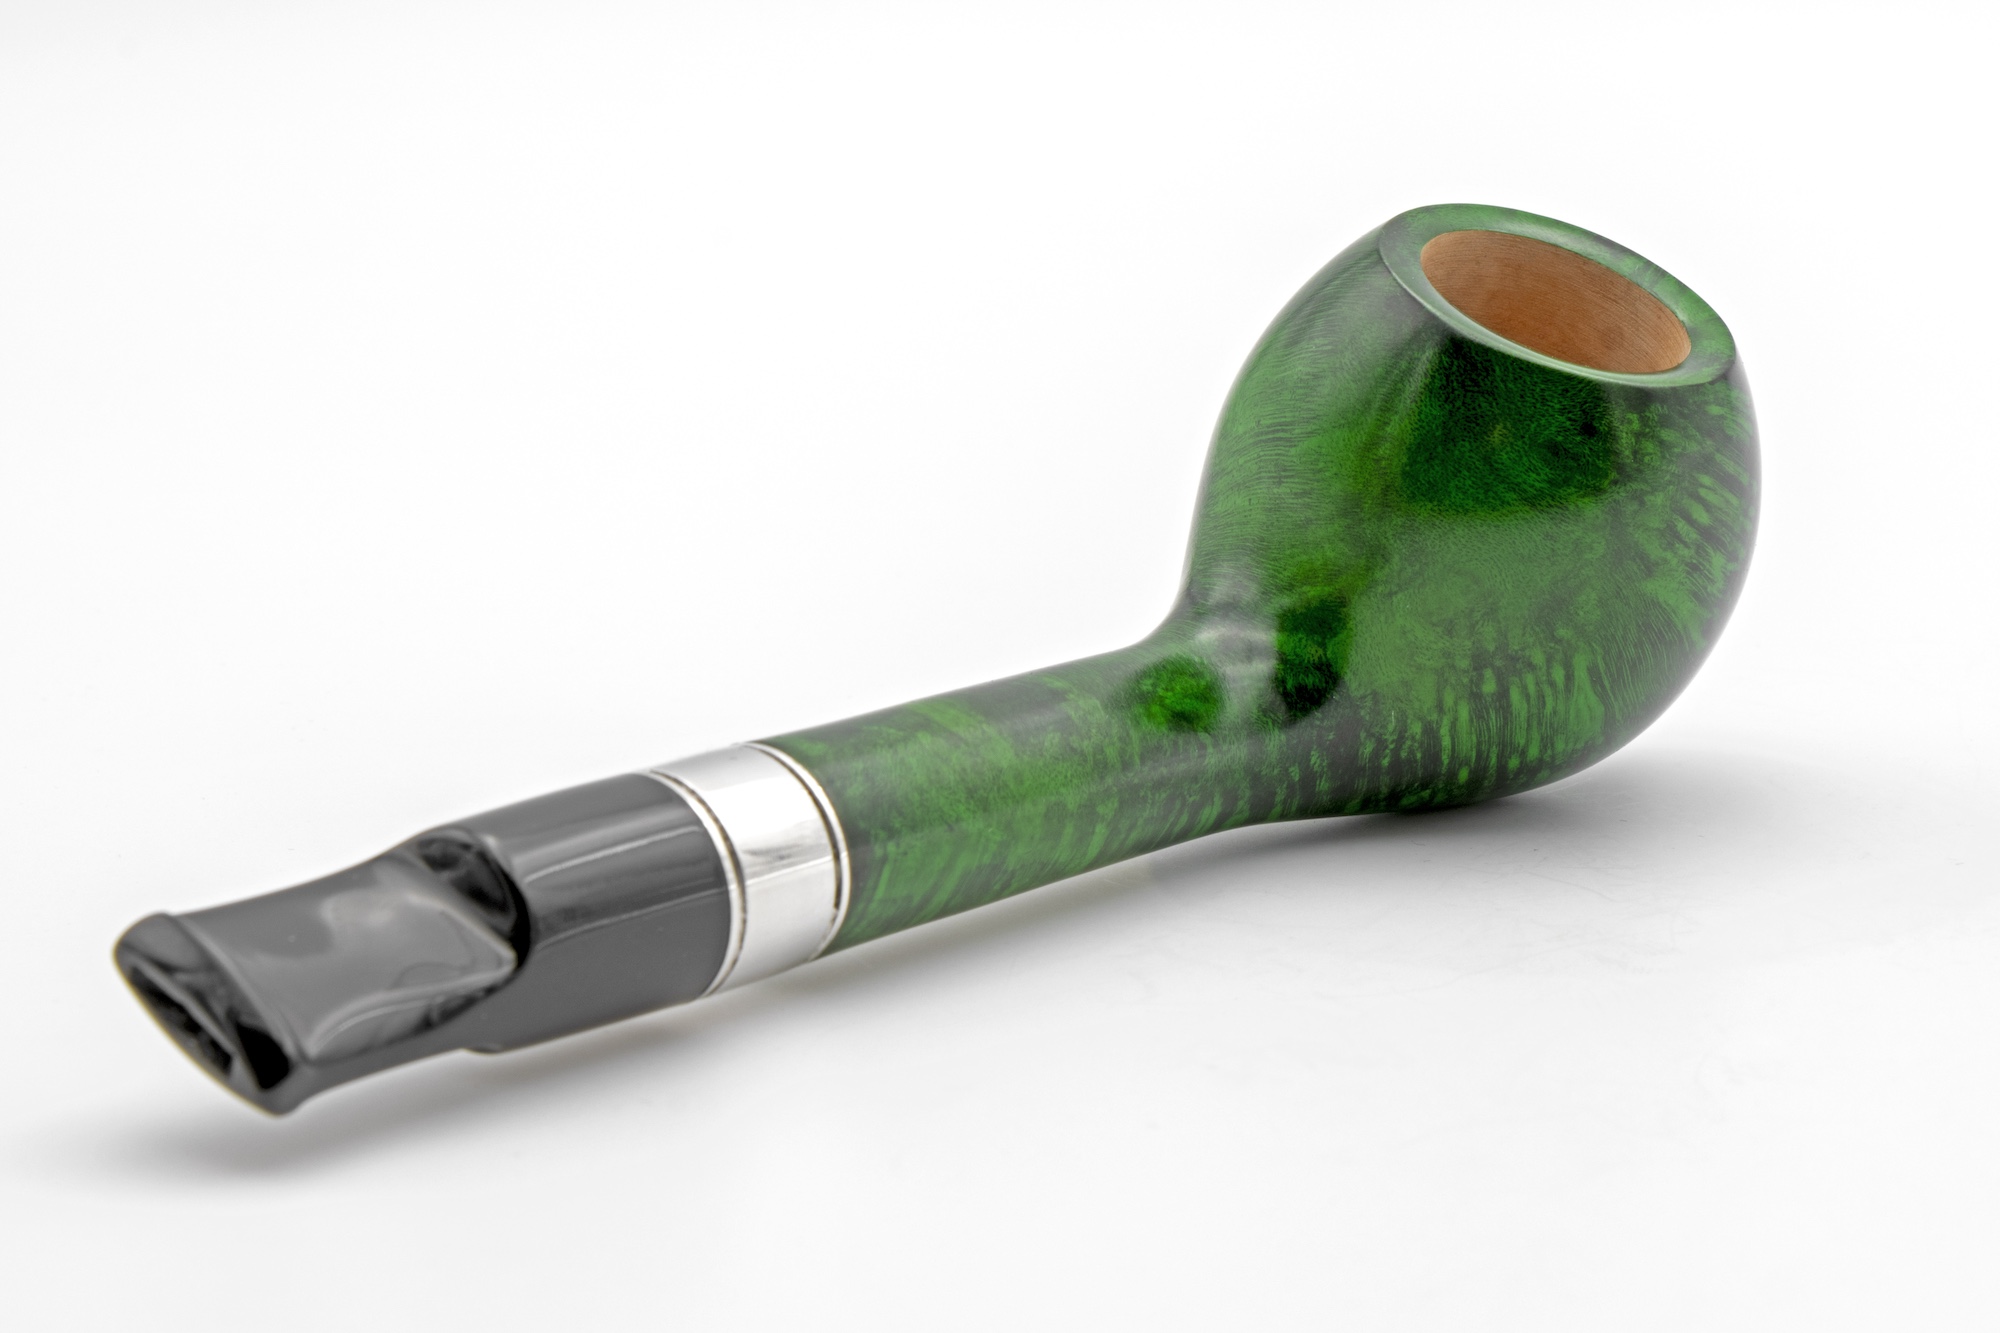 Rattray's Lil Pipe Green 173